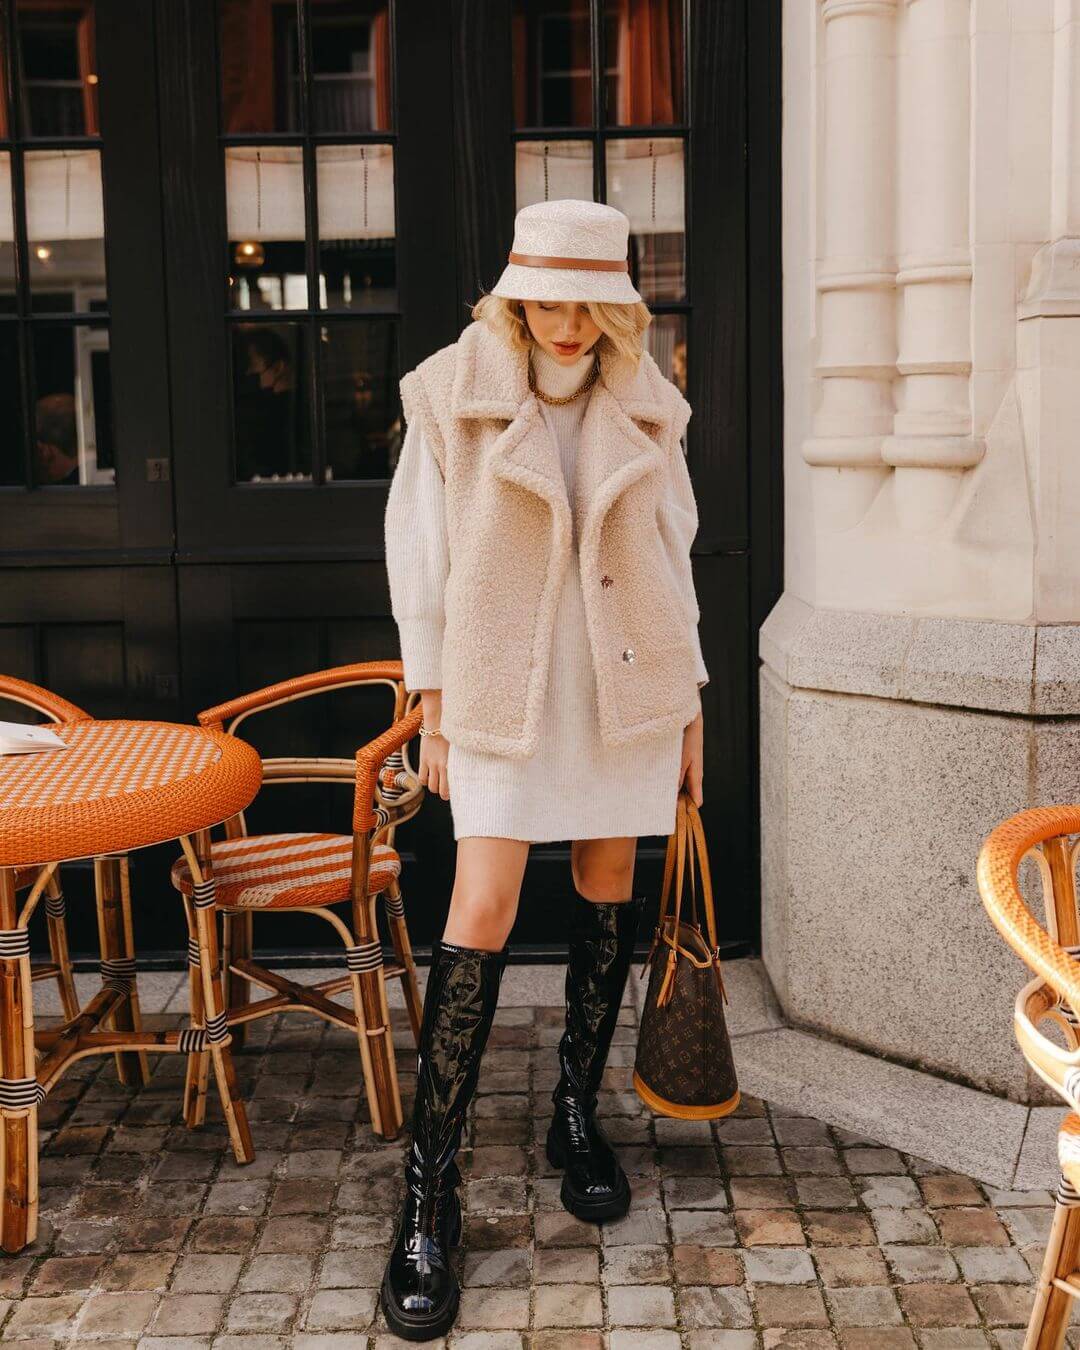 The Coziest Sweater Dress Outfit For Fall & Winter - The Cool Hour ...